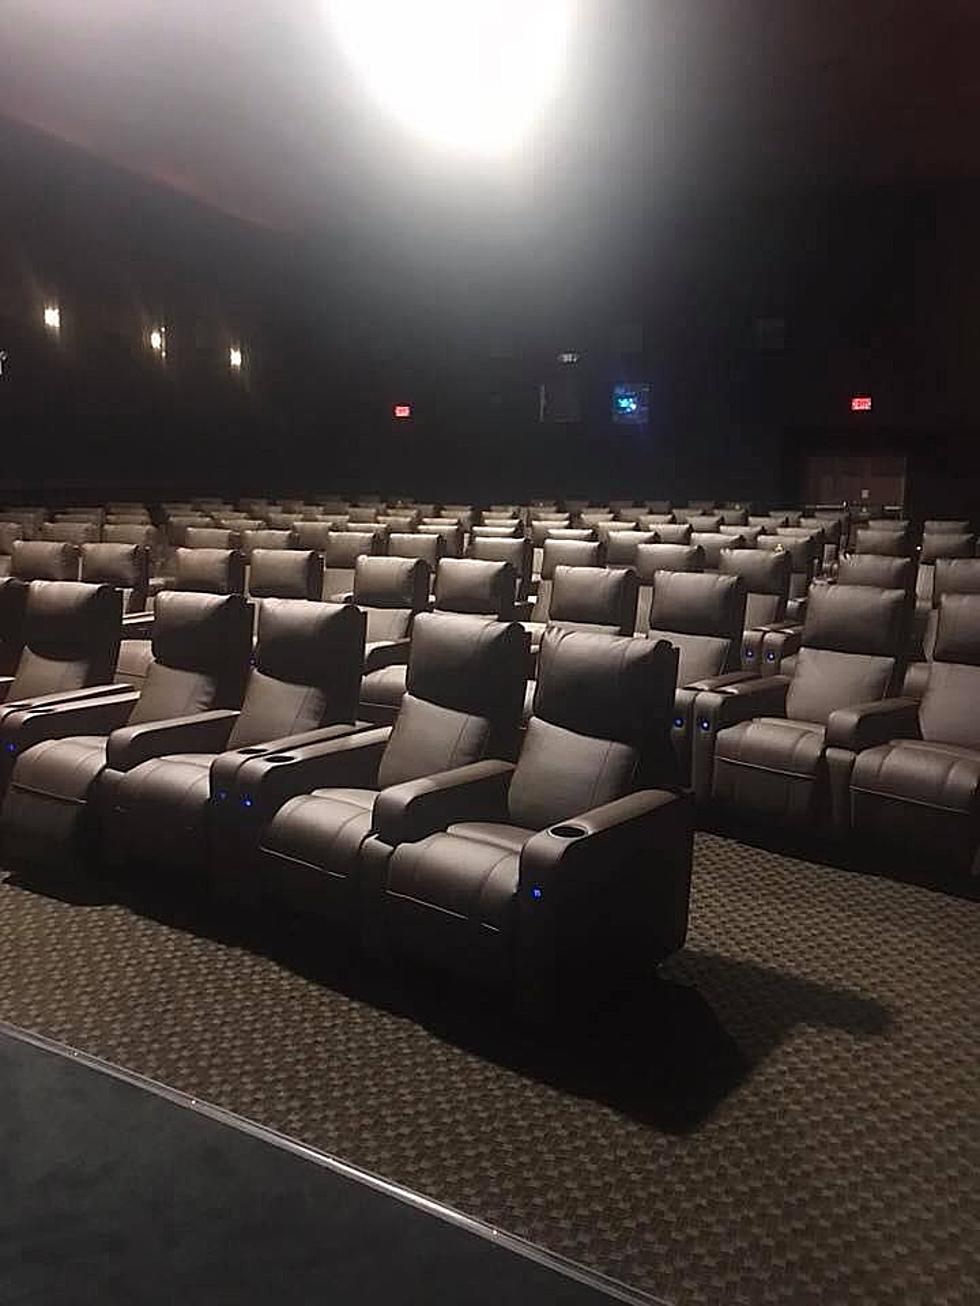 Check Out Photos of the Upgraded Wichita Falls Mall Theater